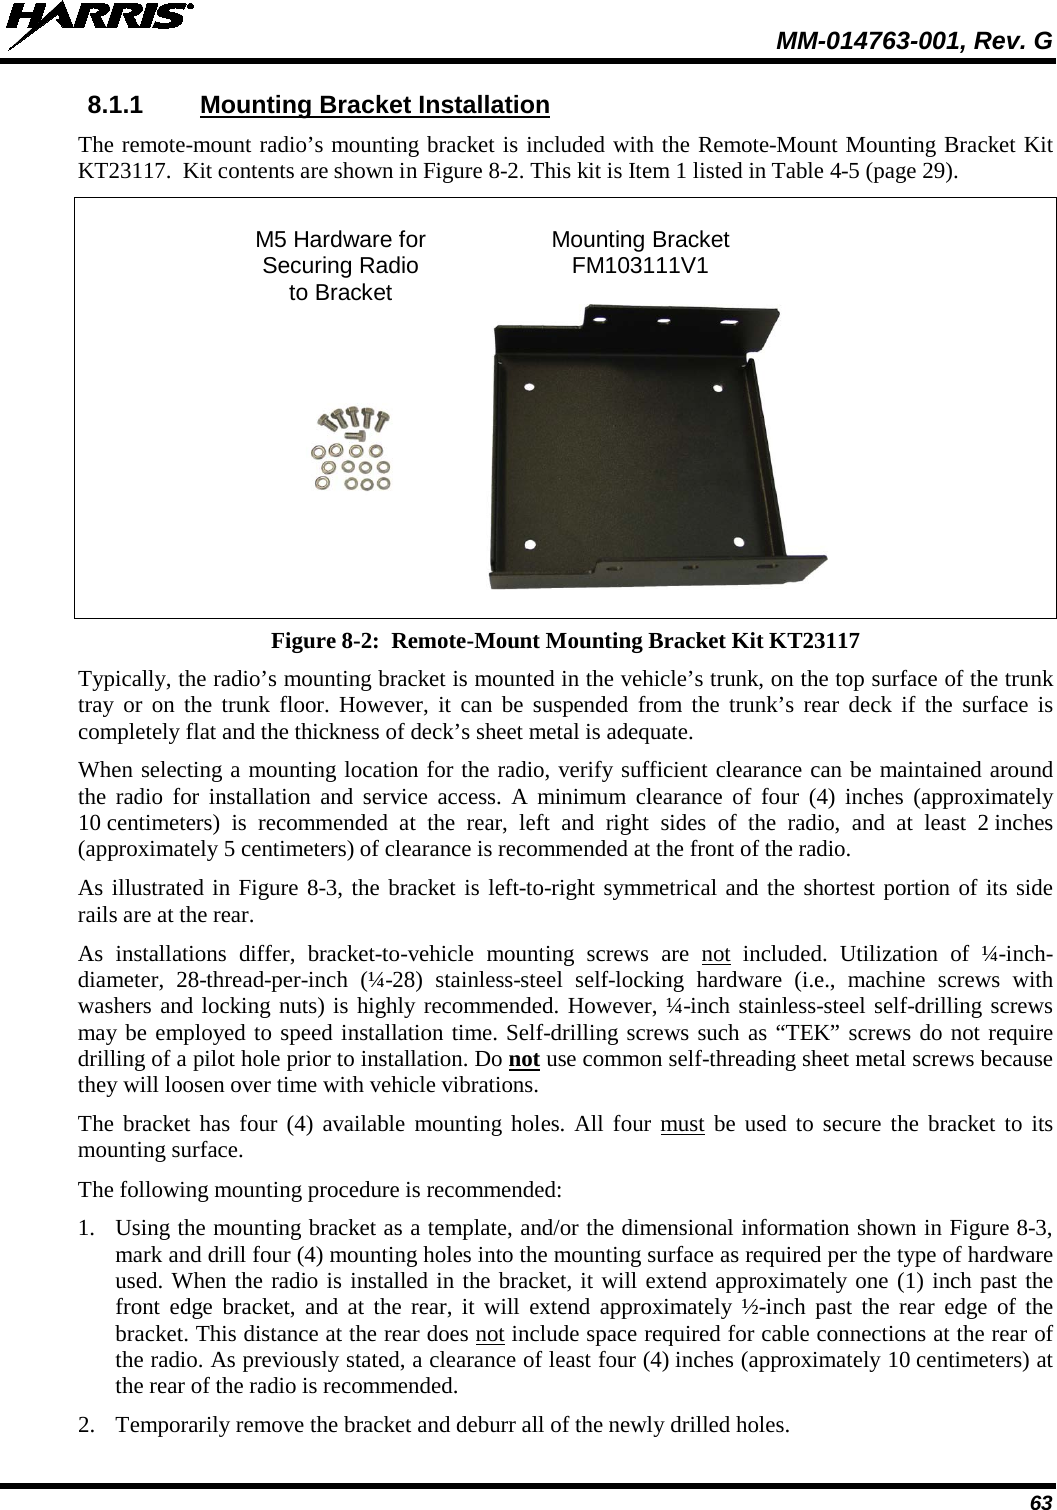  MM-014763-001, Rev. G 63 8.1.1 Mounting Bracket Installation The remote-mount radio’s mounting bracket is included with the Remote-Mount Mounting Bracket Kit KT23117.  Kit contents are shown in Figure 8-2. This kit is Item 1 listed in Table 4-5 (page 29).   M5 Hardware for Mounting Bracket  Securing Radio FM103111V1  to Bracket     Figure 8-2:  Remote-Mount Mounting Bracket Kit KT23117 Typically, the radio’s mounting bracket is mounted in the vehicle’s trunk, on the top surface of the trunk tray or on the trunk floor. However, it can be suspended from the trunk’s rear deck if the surface is completely flat and the thickness of deck’s sheet metal is adequate. When selecting a mounting location for the radio, verify sufficient clearance can be maintained around the radio for installation and service access. A minimum clearance of four (4) inches (approximately 10 centimeters)  is recommended at the rear,  left and right sides of the radio, and at least 2 inches (approximately 5 centimeters) of clearance is recommended at the front of the radio. As illustrated in Figure 8-3, the bracket is left-to-right symmetrical and the shortest portion of its side rails are at the rear. As installations differ, bracket-to-vehicle mounting screws are not included. Utilization of ¼-inch-diameter, 28-thread-per-inch (¼-28) stainless-steel self-locking hardware (i.e., machine screws with washers and locking nuts) is highly recommended. However, ¼-inch stainless-steel self-drilling screws may be employed to speed installation time. Self-drilling screws such as “TEK” screws do not require drilling of a pilot hole prior to installation. Do not use common self-threading sheet metal screws because they will loosen over time with vehicle vibrations. The bracket has four (4) available mounting holes. All four must be used to secure the bracket to its mounting surface. The following mounting procedure is recommended: 1. Using the mounting bracket as a template, and/or the dimensional information shown in Figure 8-3, mark and drill four (4) mounting holes into the mounting surface as required per the type of hardware used. When the radio is installed in the bracket, it will extend approximately one (1) inch past the front edge bracket, and at the rear, it will extend approximately ½-inch past the rear edge of the bracket. This distance at the rear does not include space required for cable connections at the rear of the radio. As previously stated, a clearance of least four (4) inches (approximately 10 centimeters) at the rear of the radio is recommended. 2. Temporarily remove the bracket and deburr all of the newly drilled holes. 